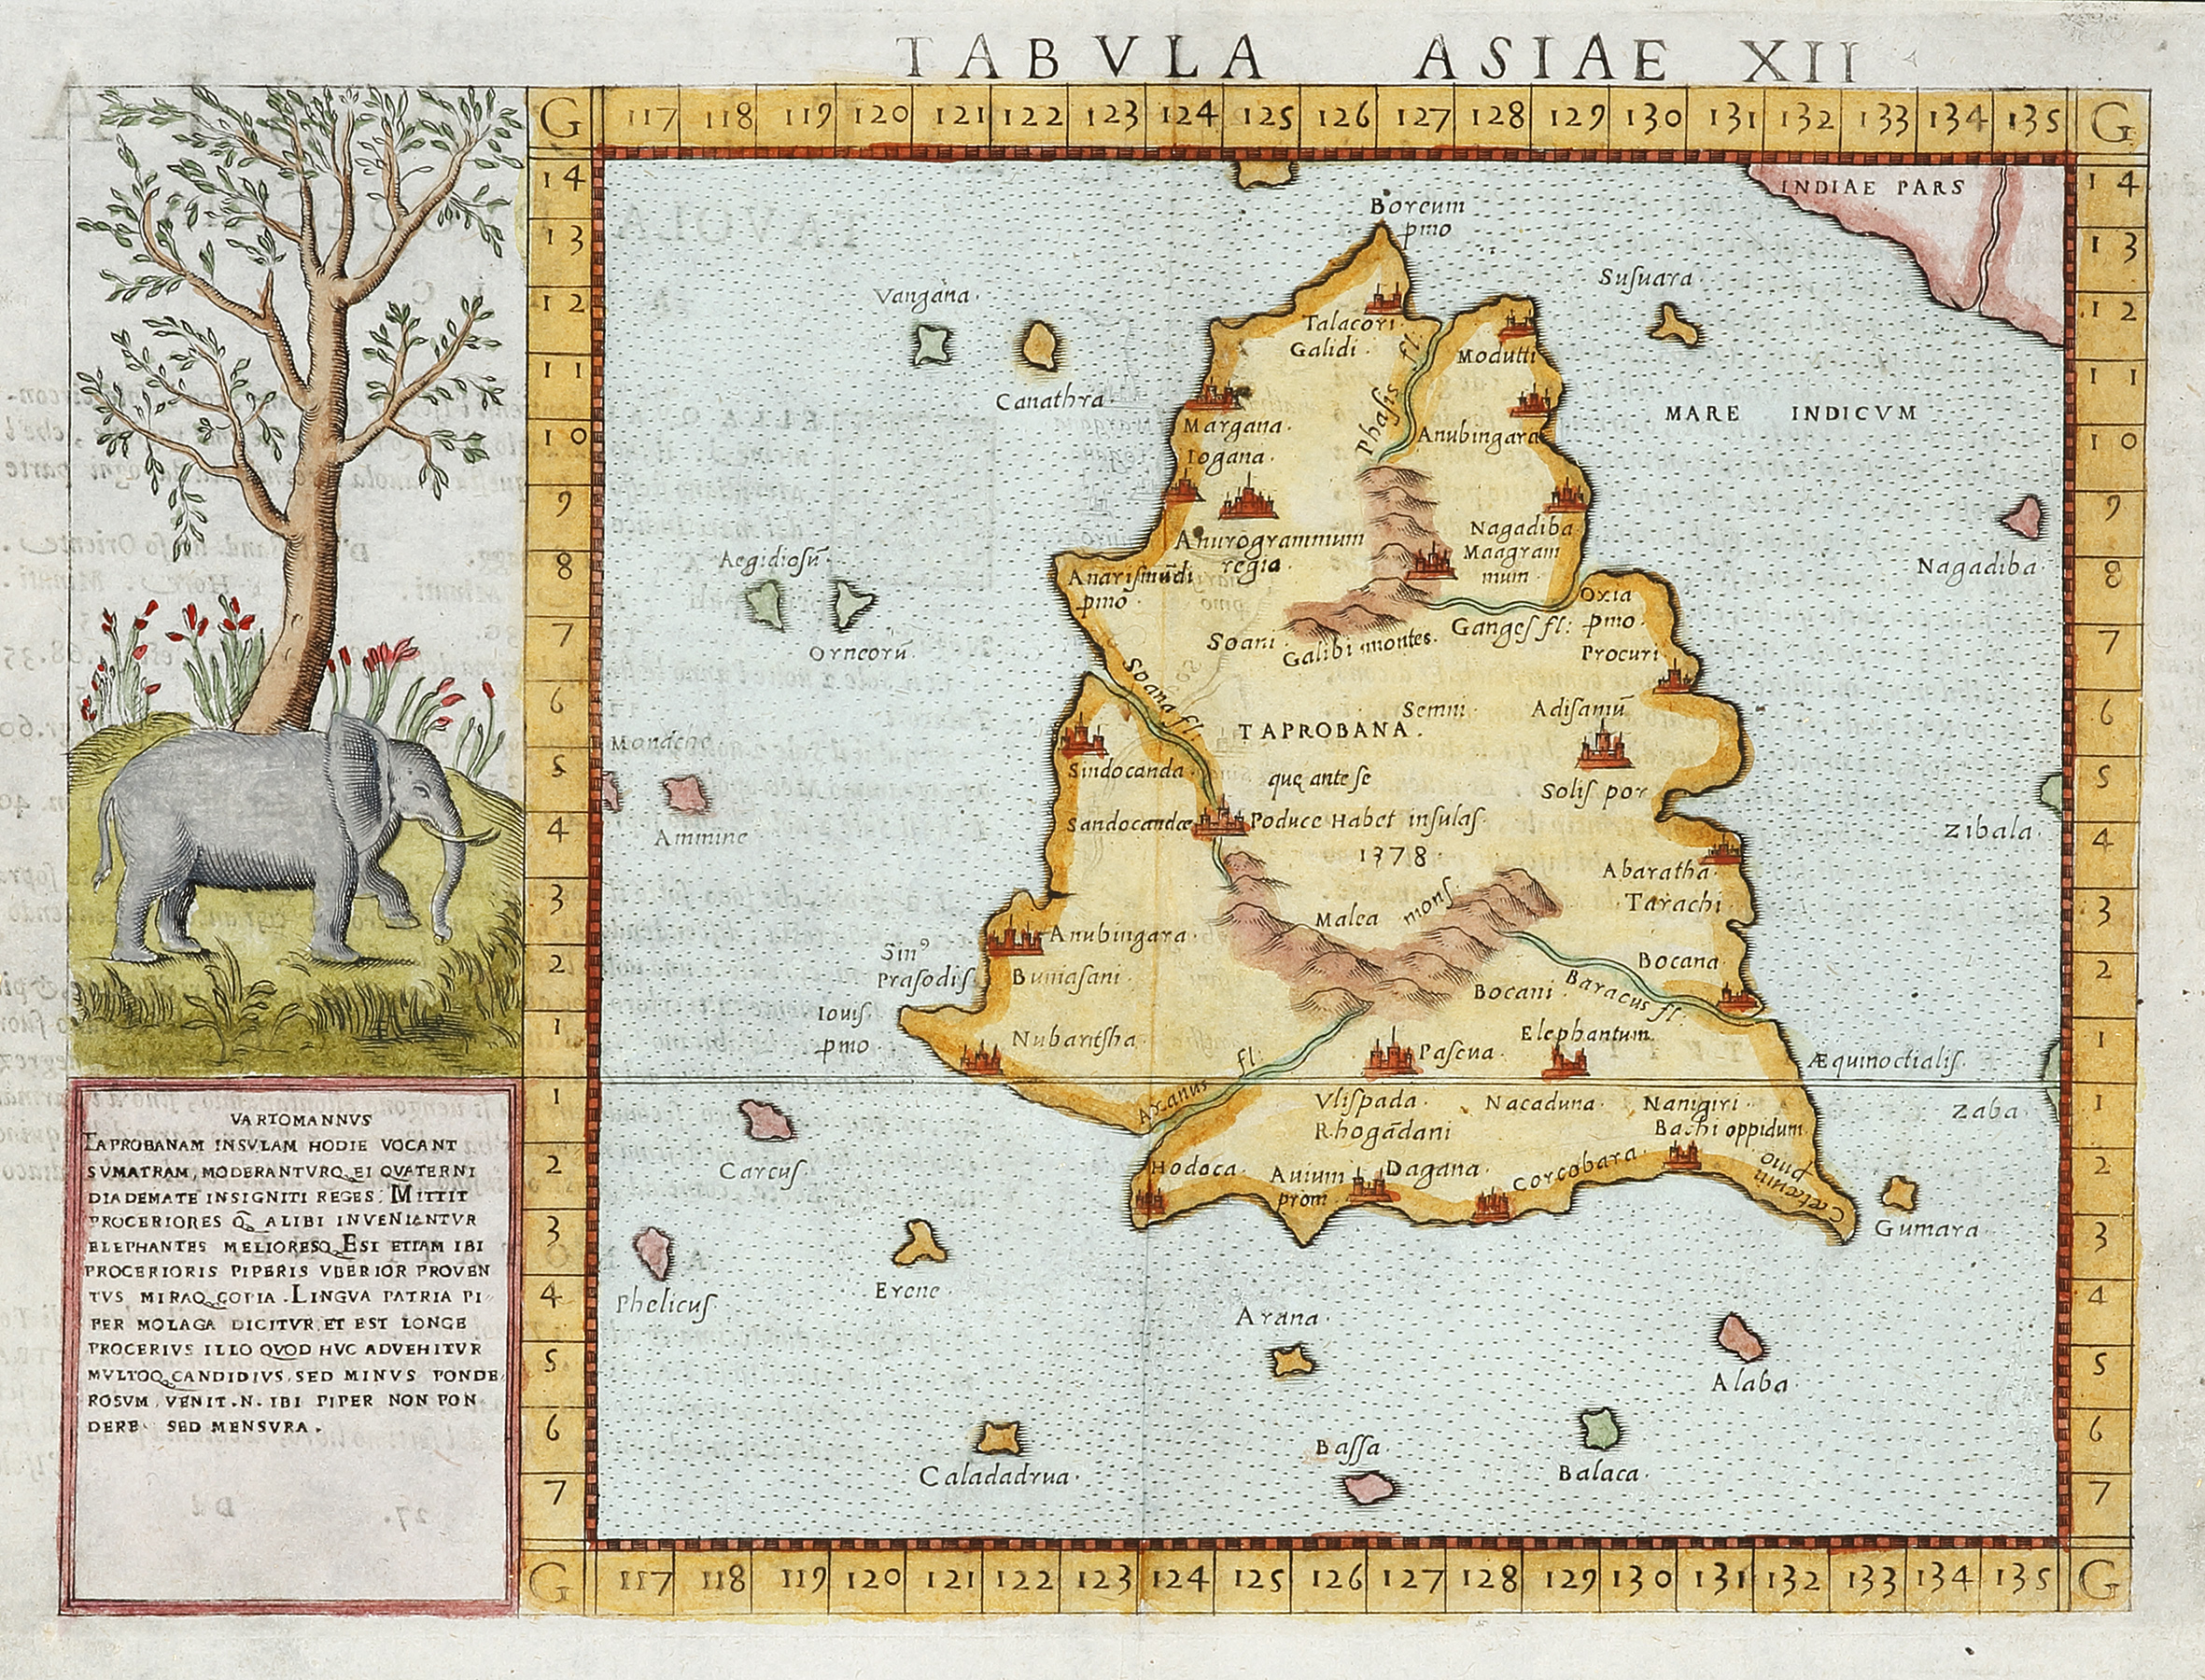 Tabula Asiae XII - Antique Print from 1574